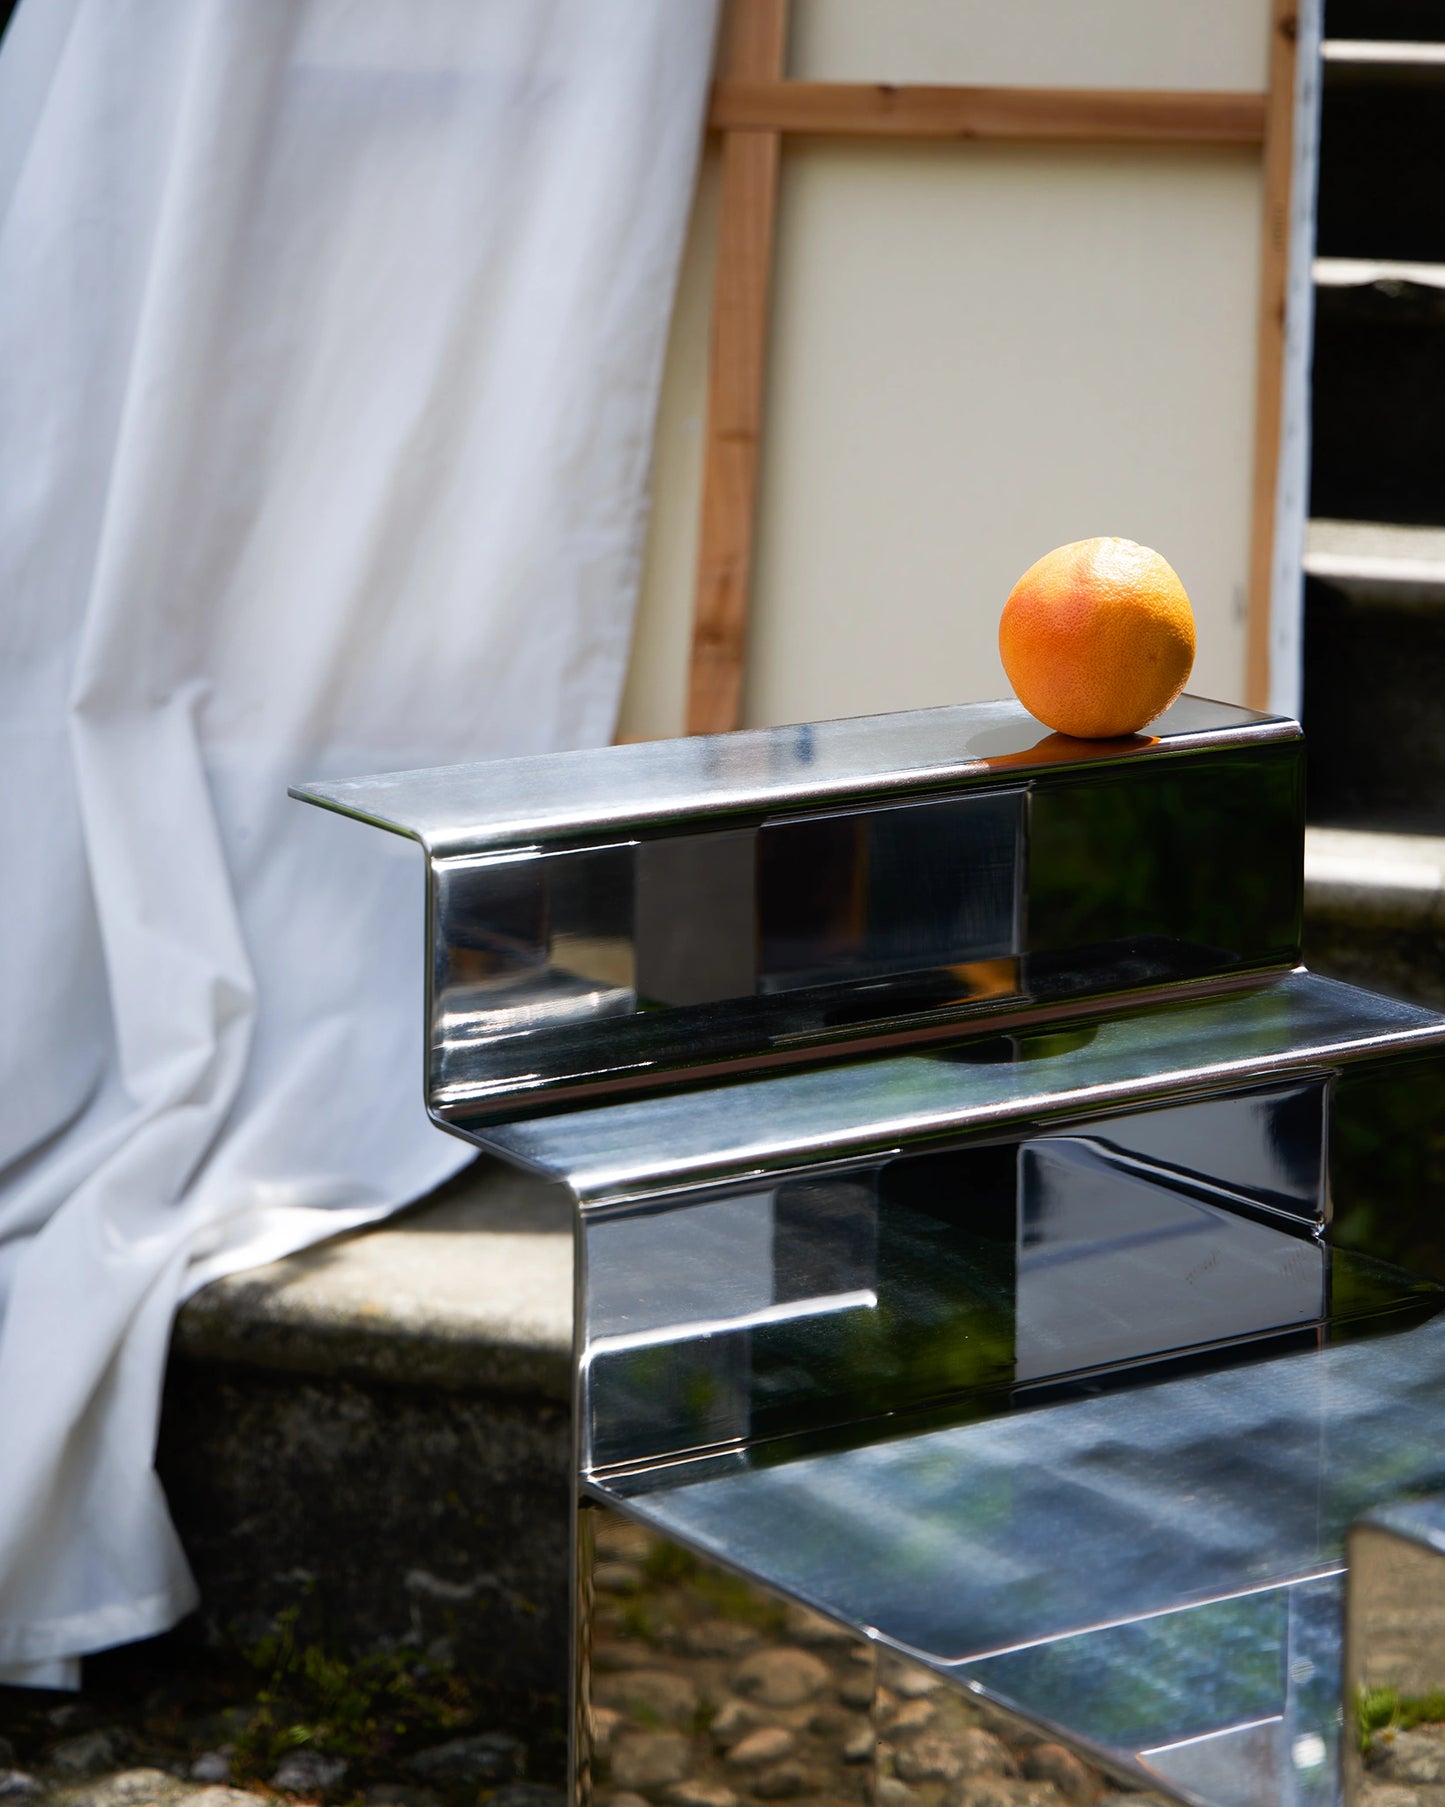 detail of a stainless-steel mirror chair with mesoamerican temple-like shape, with scene props like an orange and a curtain